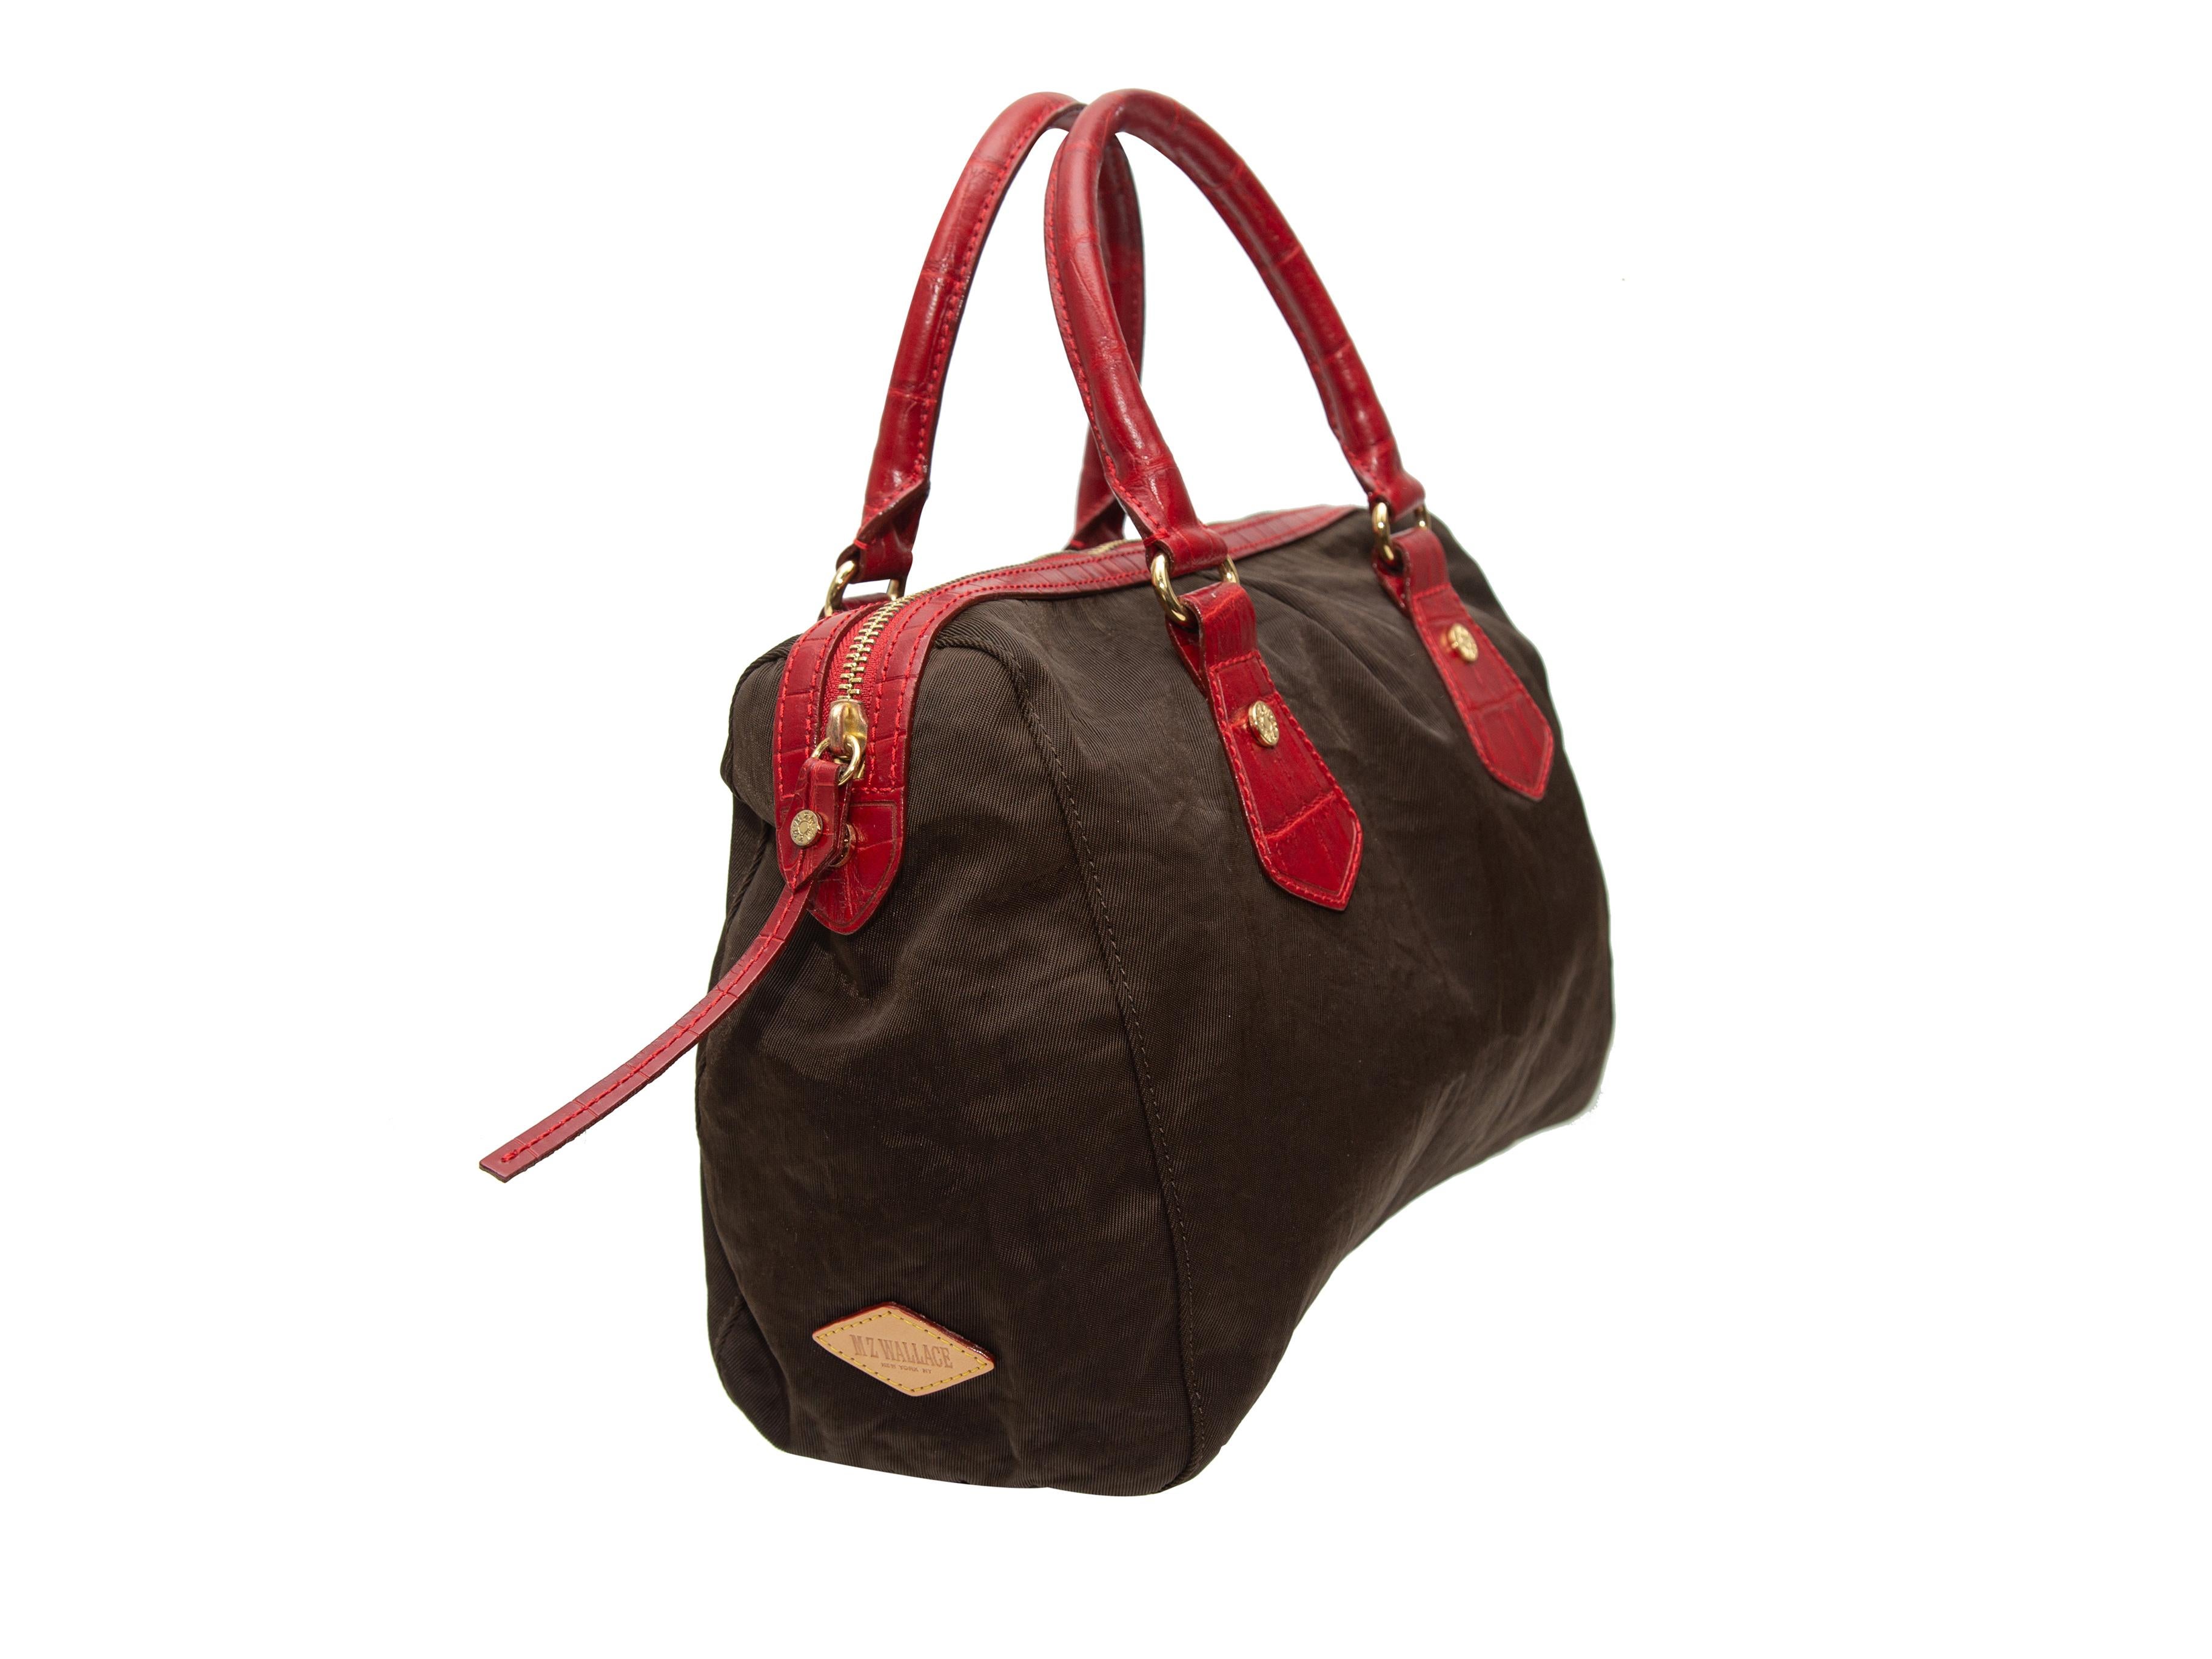 Product details: Brown fabric handbag by MZ Wallace. Red leather trim throughout. Gold-tone hardware. Interior zip pocket. Zip closure at top. 11.5